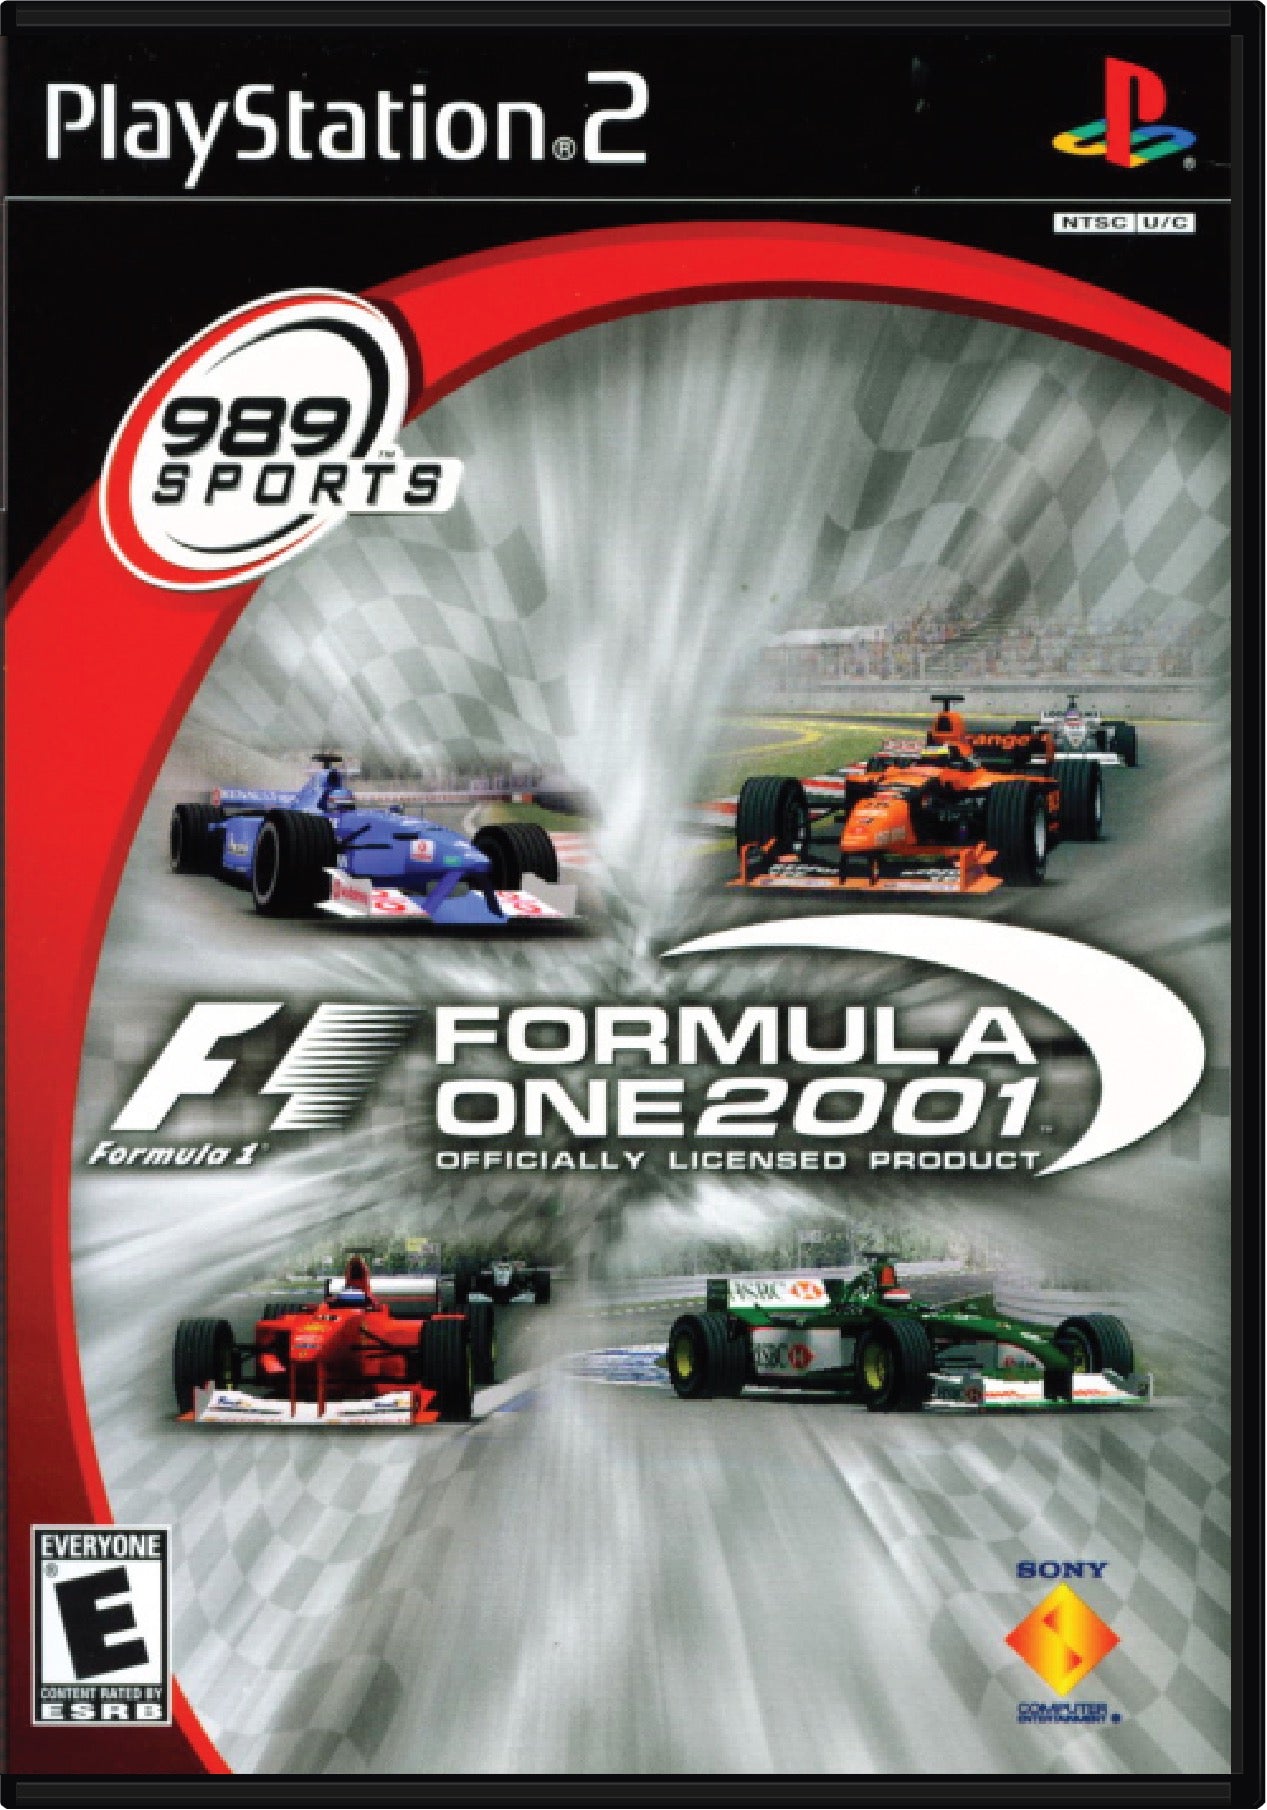 Formula One 2001 Cover Art and Product Photo